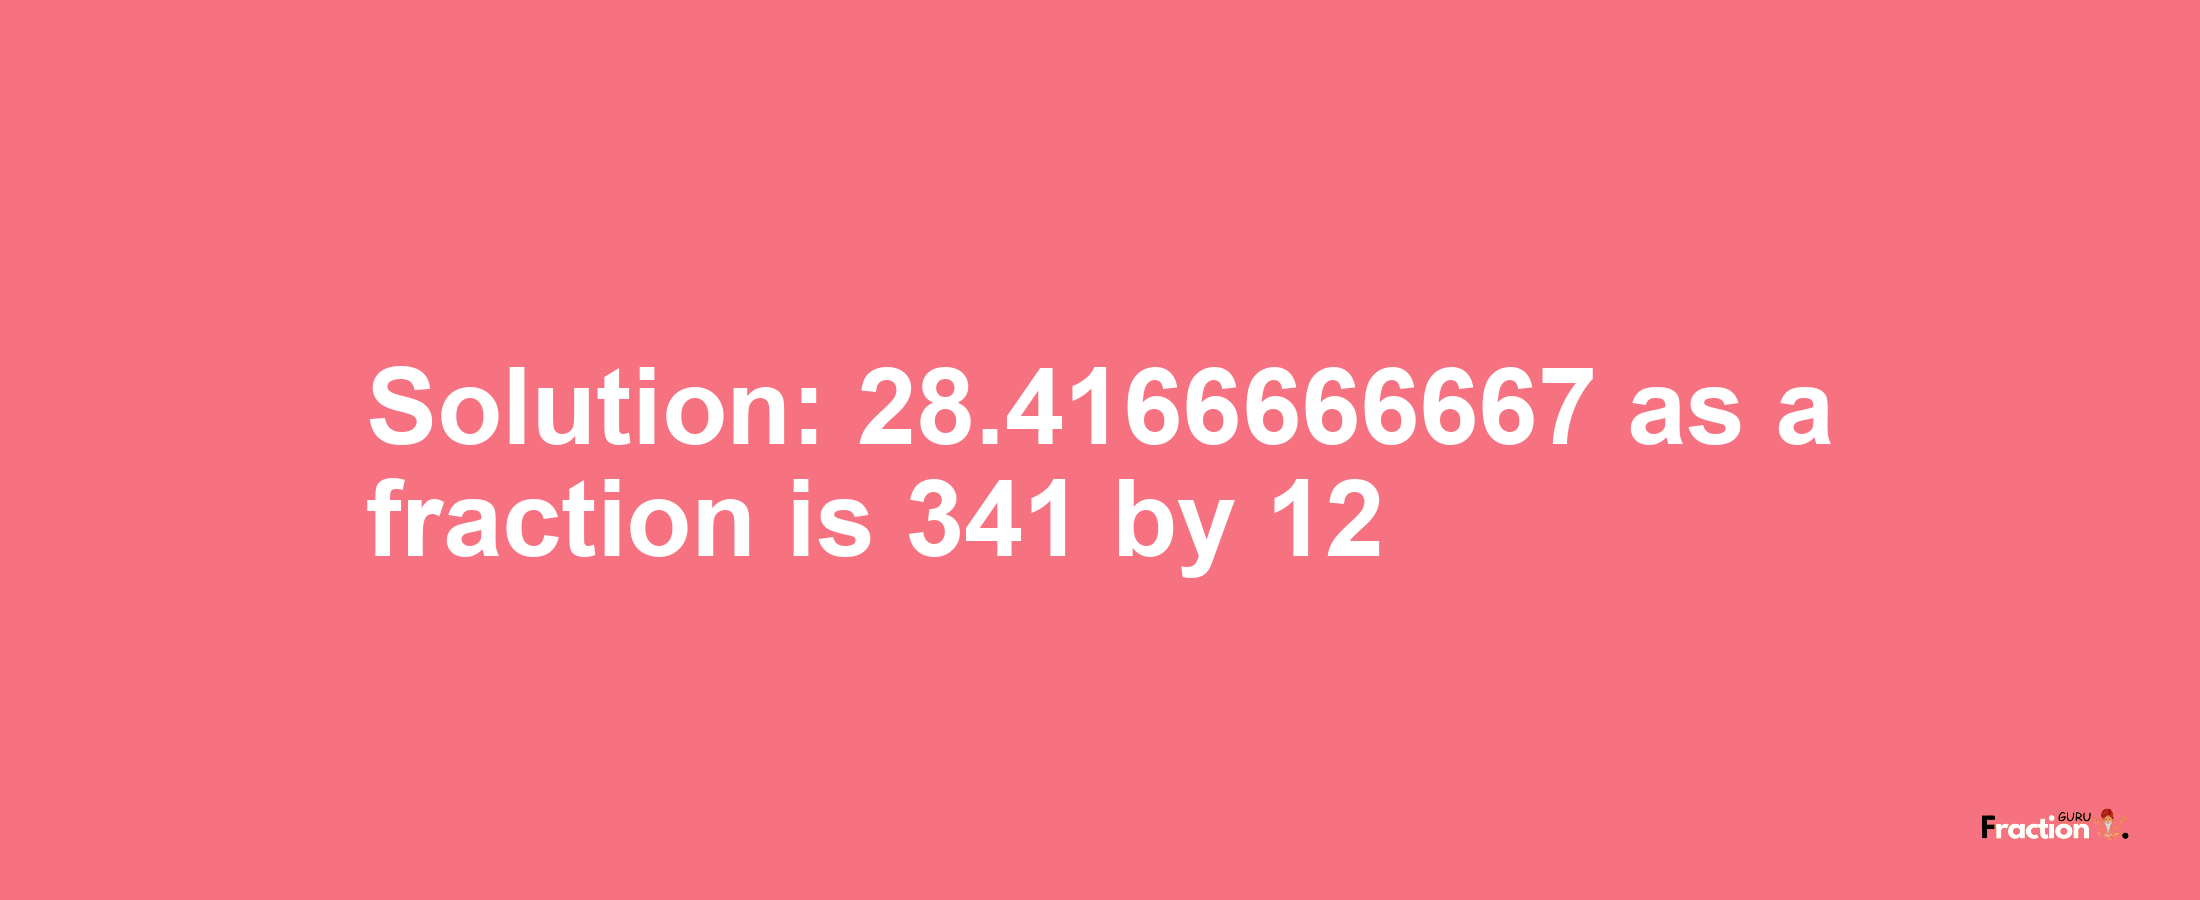 Solution:28.4166666667 as a fraction is 341/12